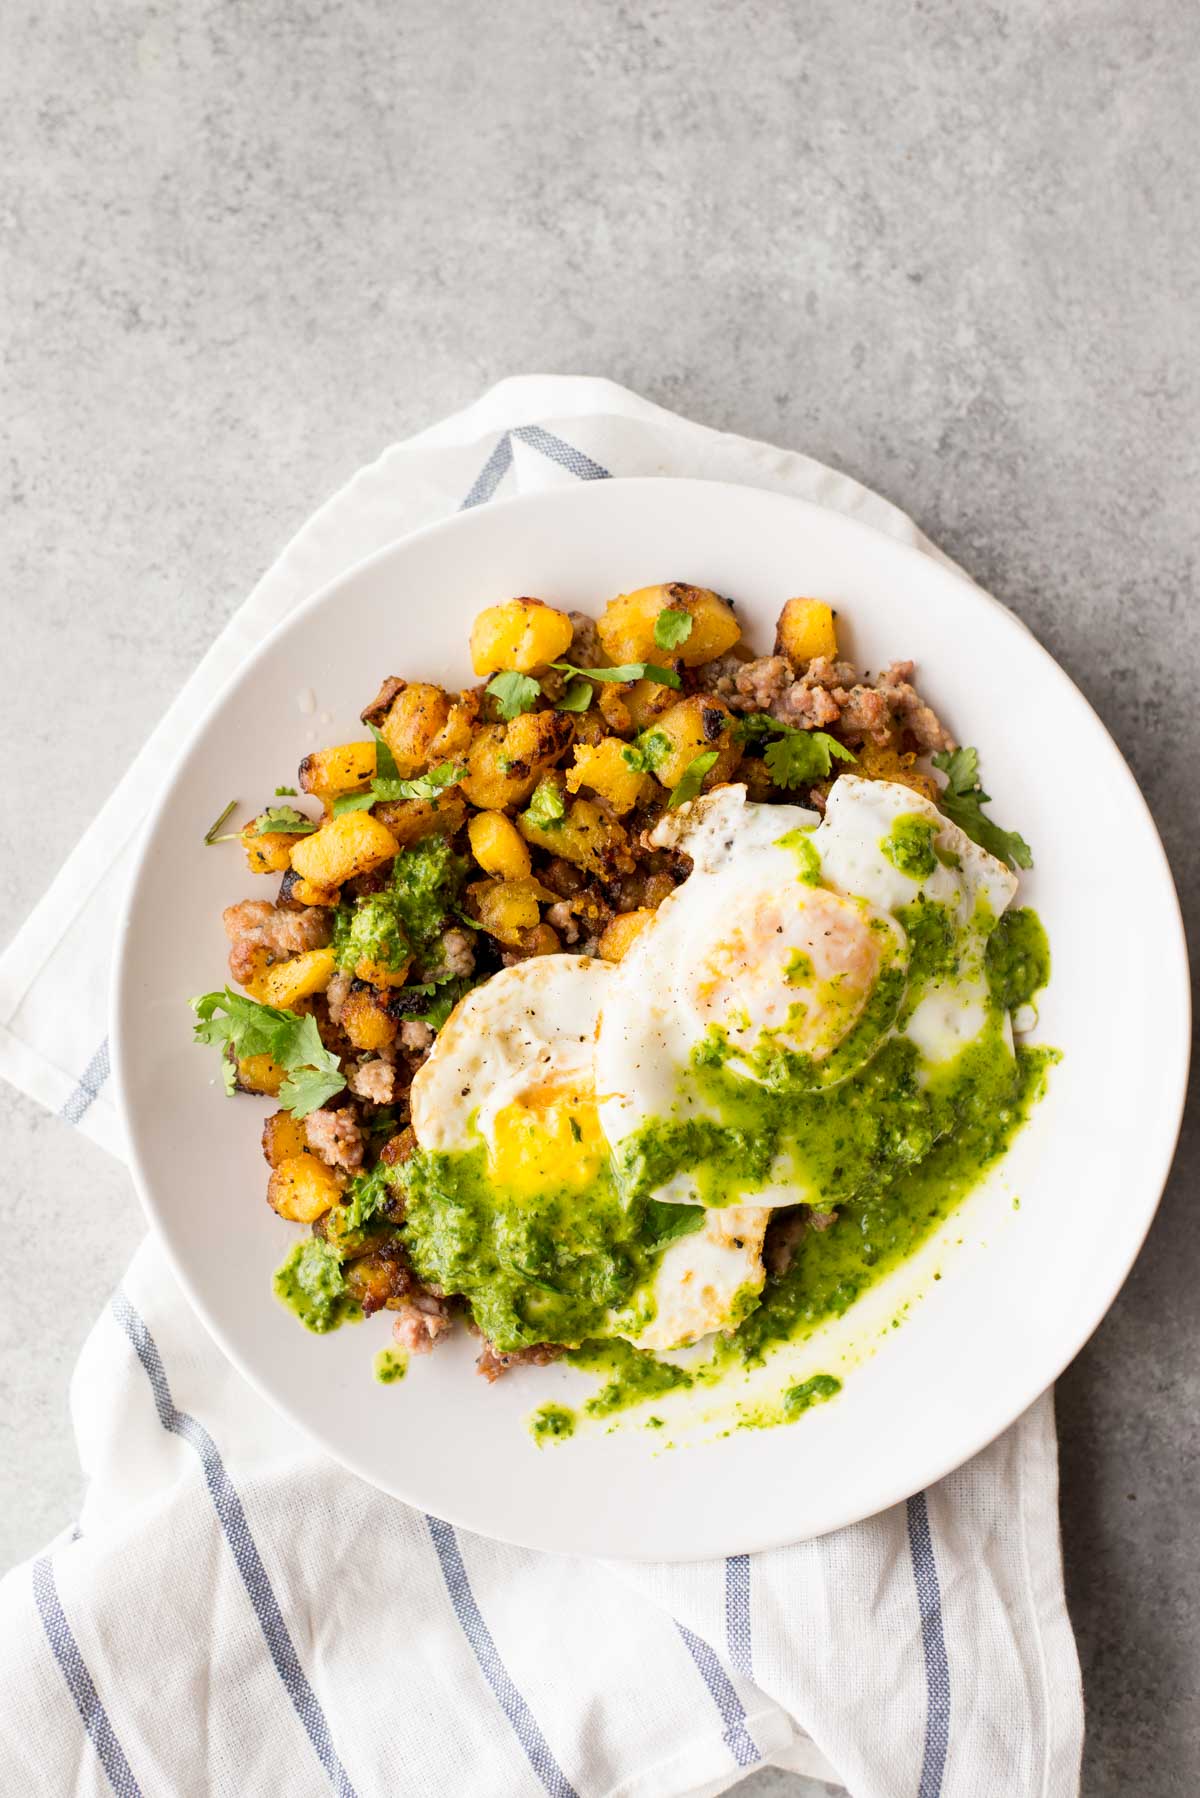 This quick and easy breakfast hash is paleo compliant and made in 10 minutes. 